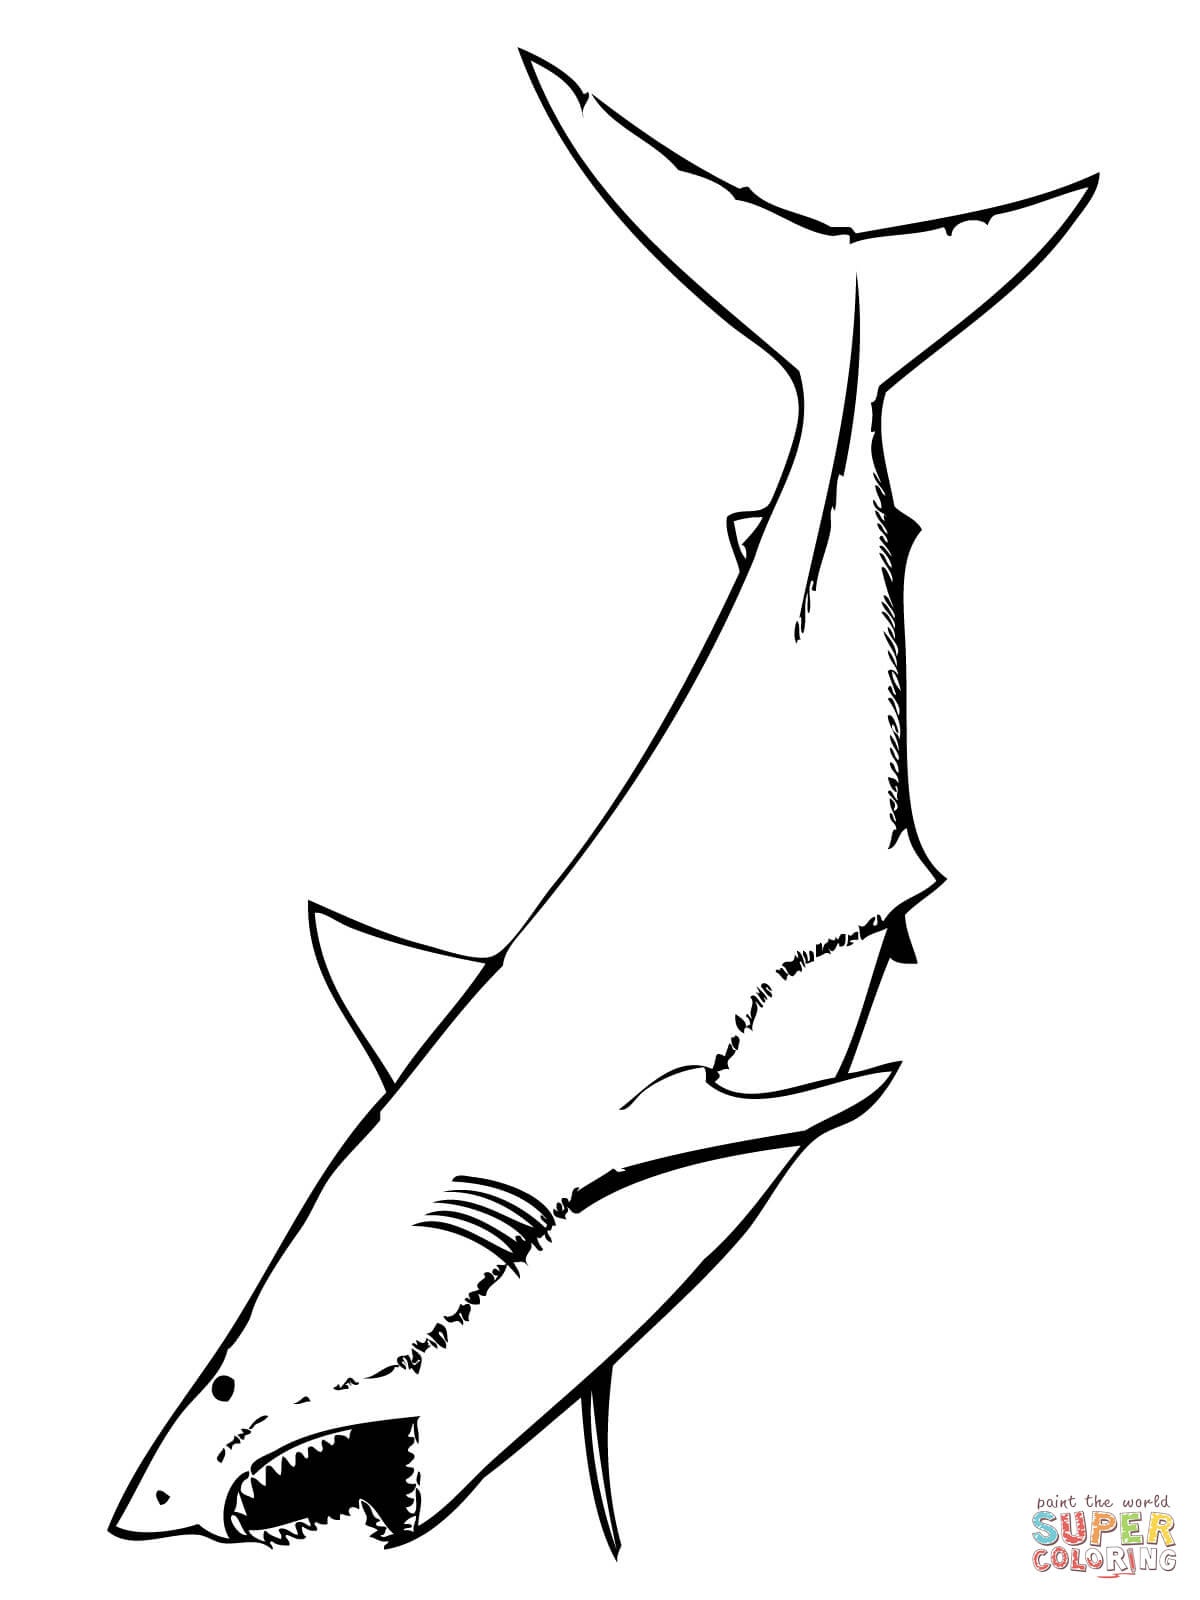 Great White Shark Coloring Pages | Free Coloring Pages - Free Printable Great White Shark Coloring Pages